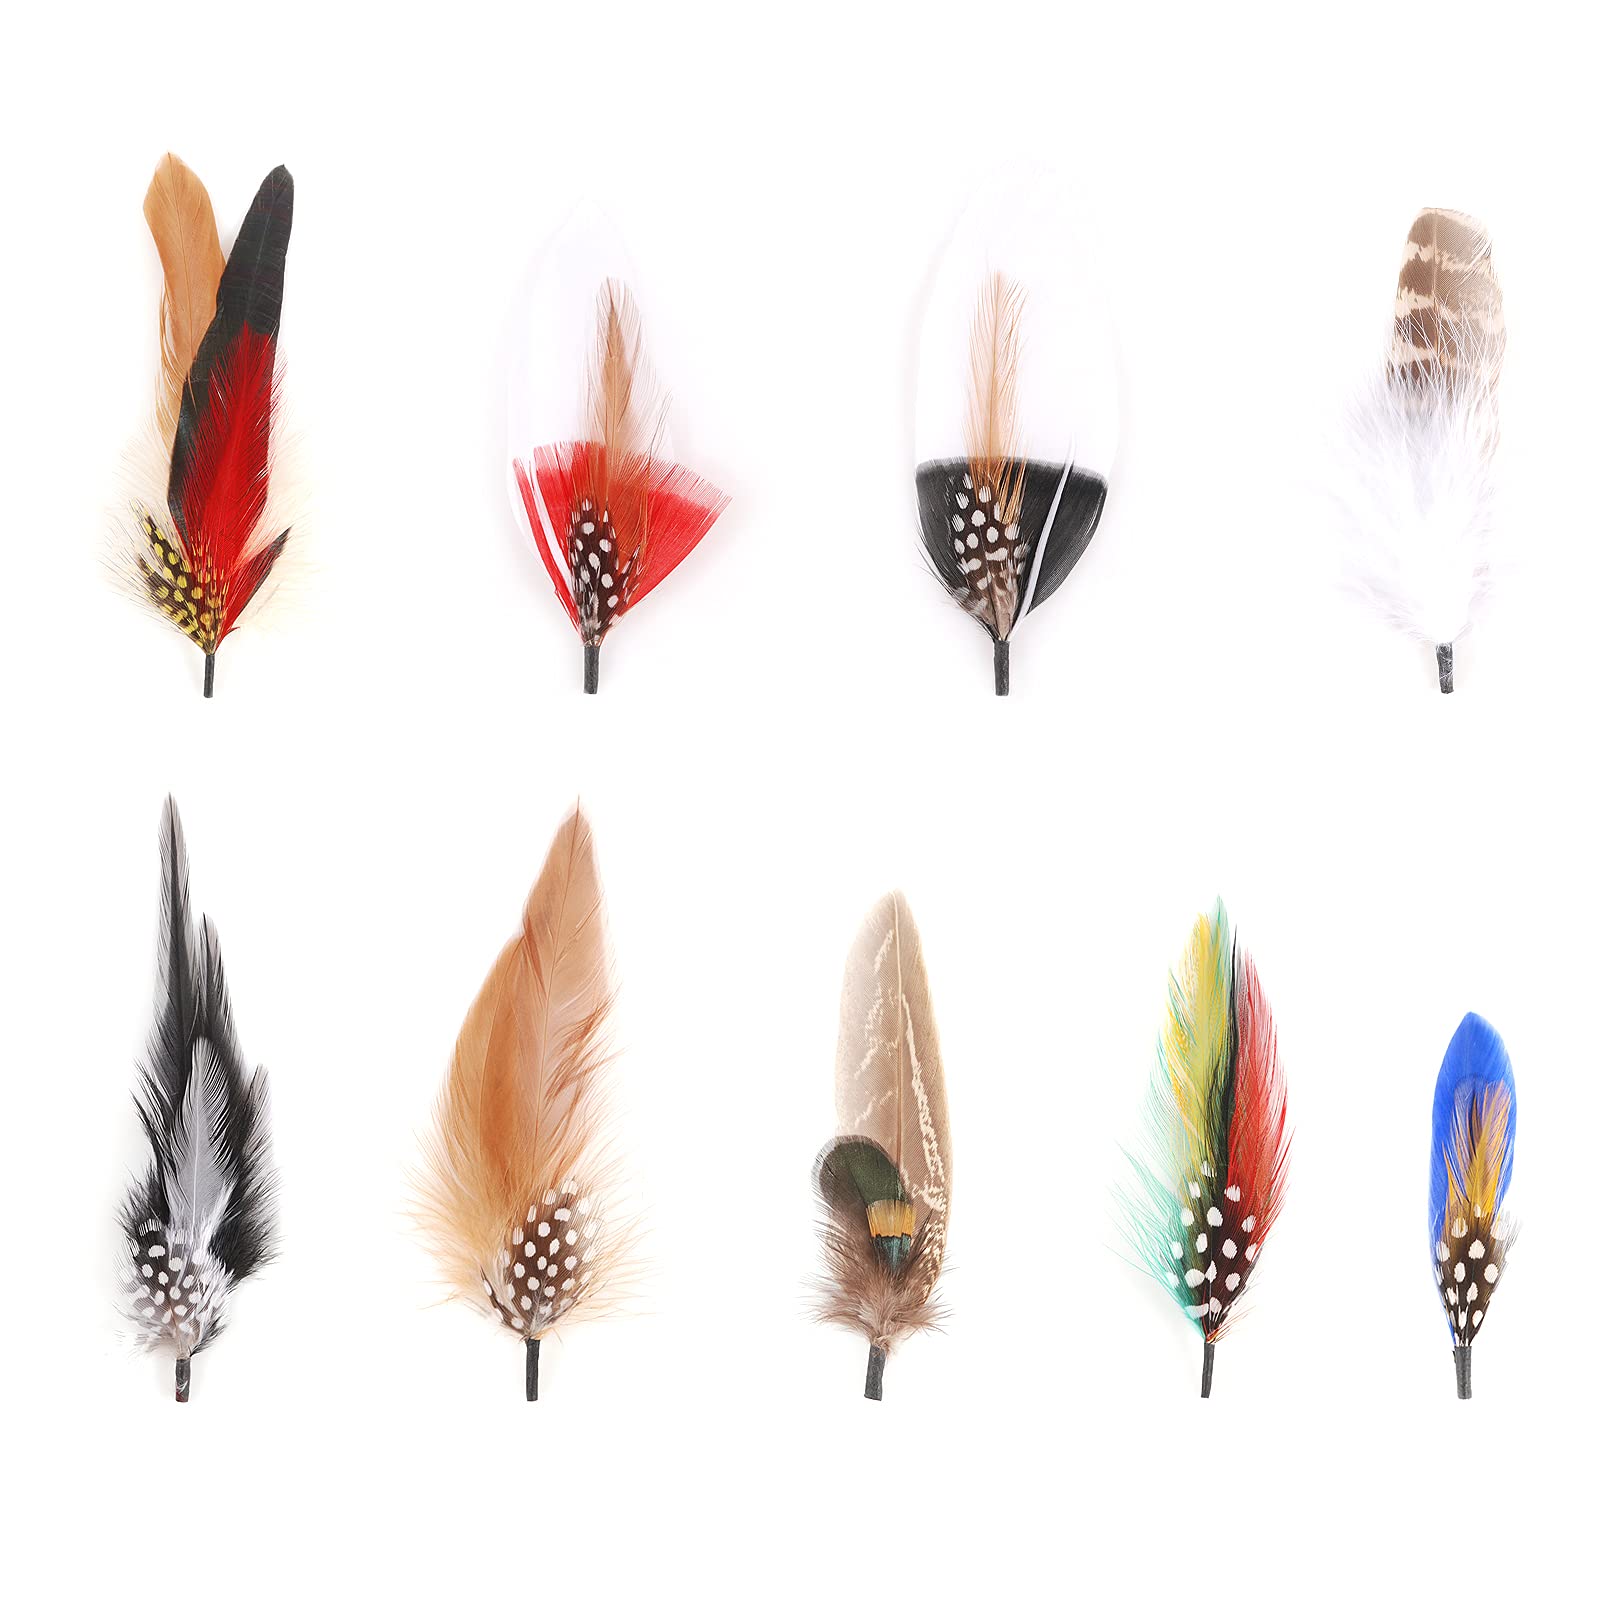 Hat Feathers 9 Pcs Assorted Natural Feather Packs Accessories for